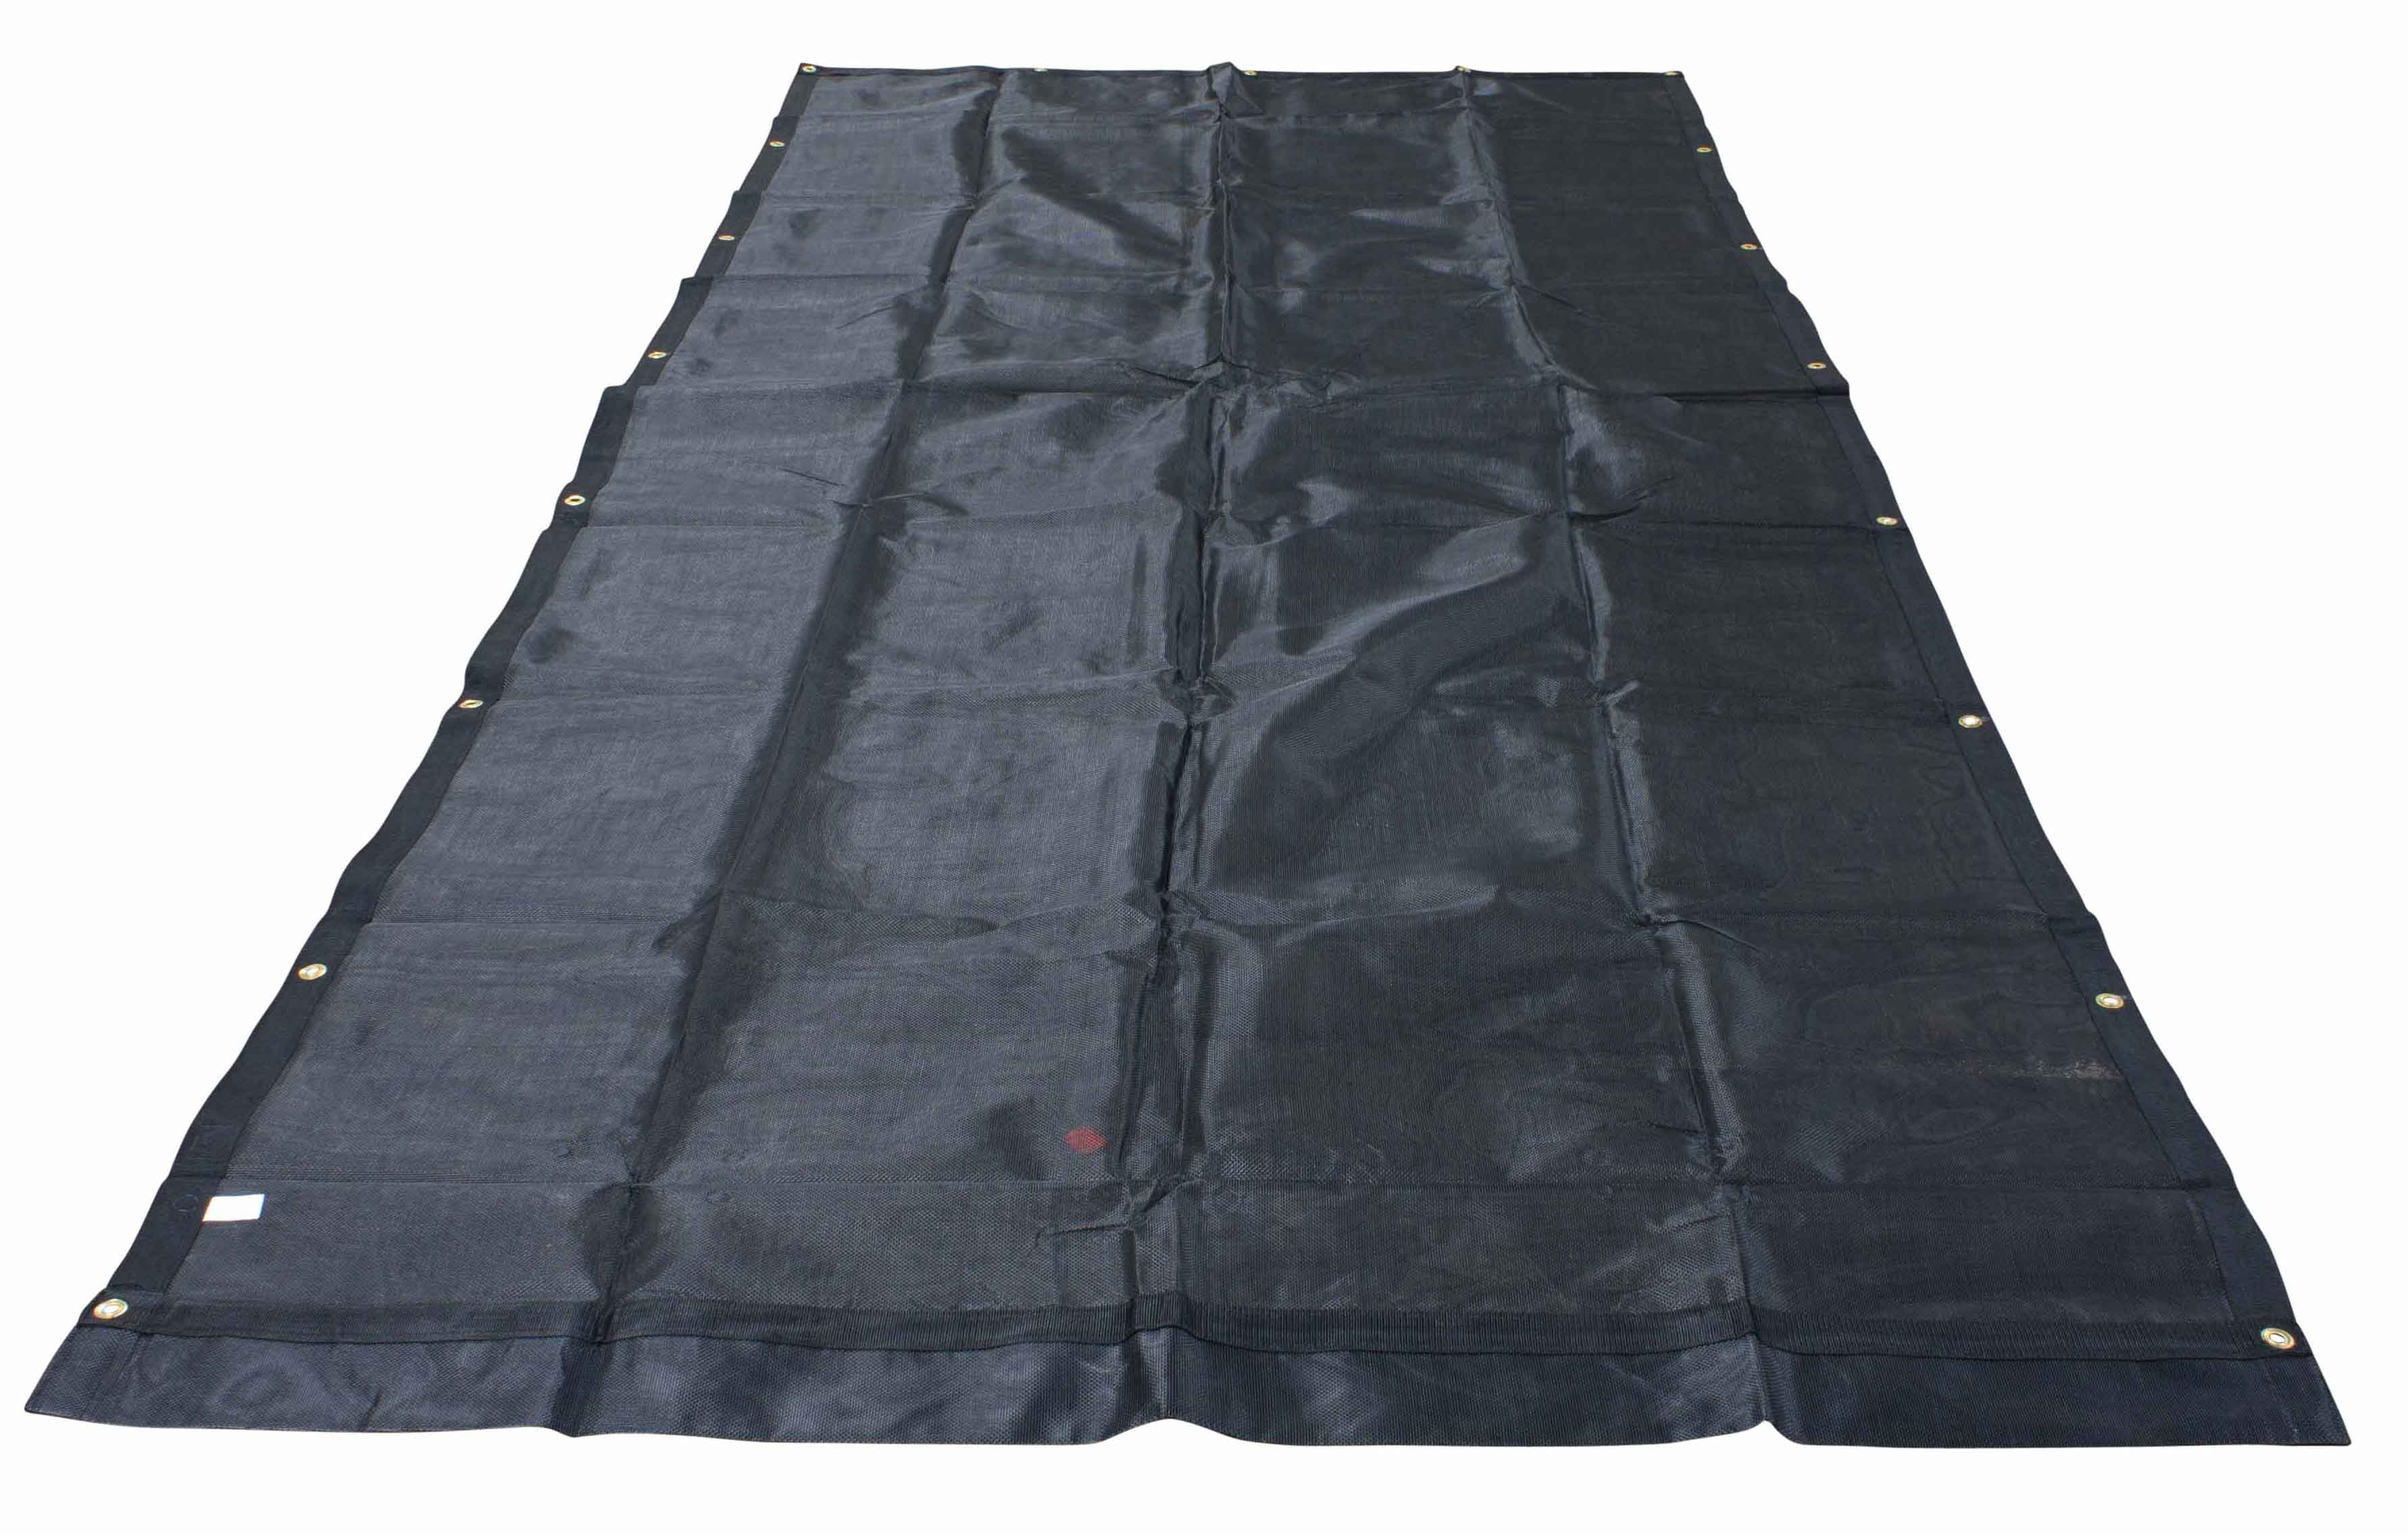 7'6" x 14' Dump Truck Vinyl Coated Mesh Tarps Cover with 5 Inch 18oz Double Pock